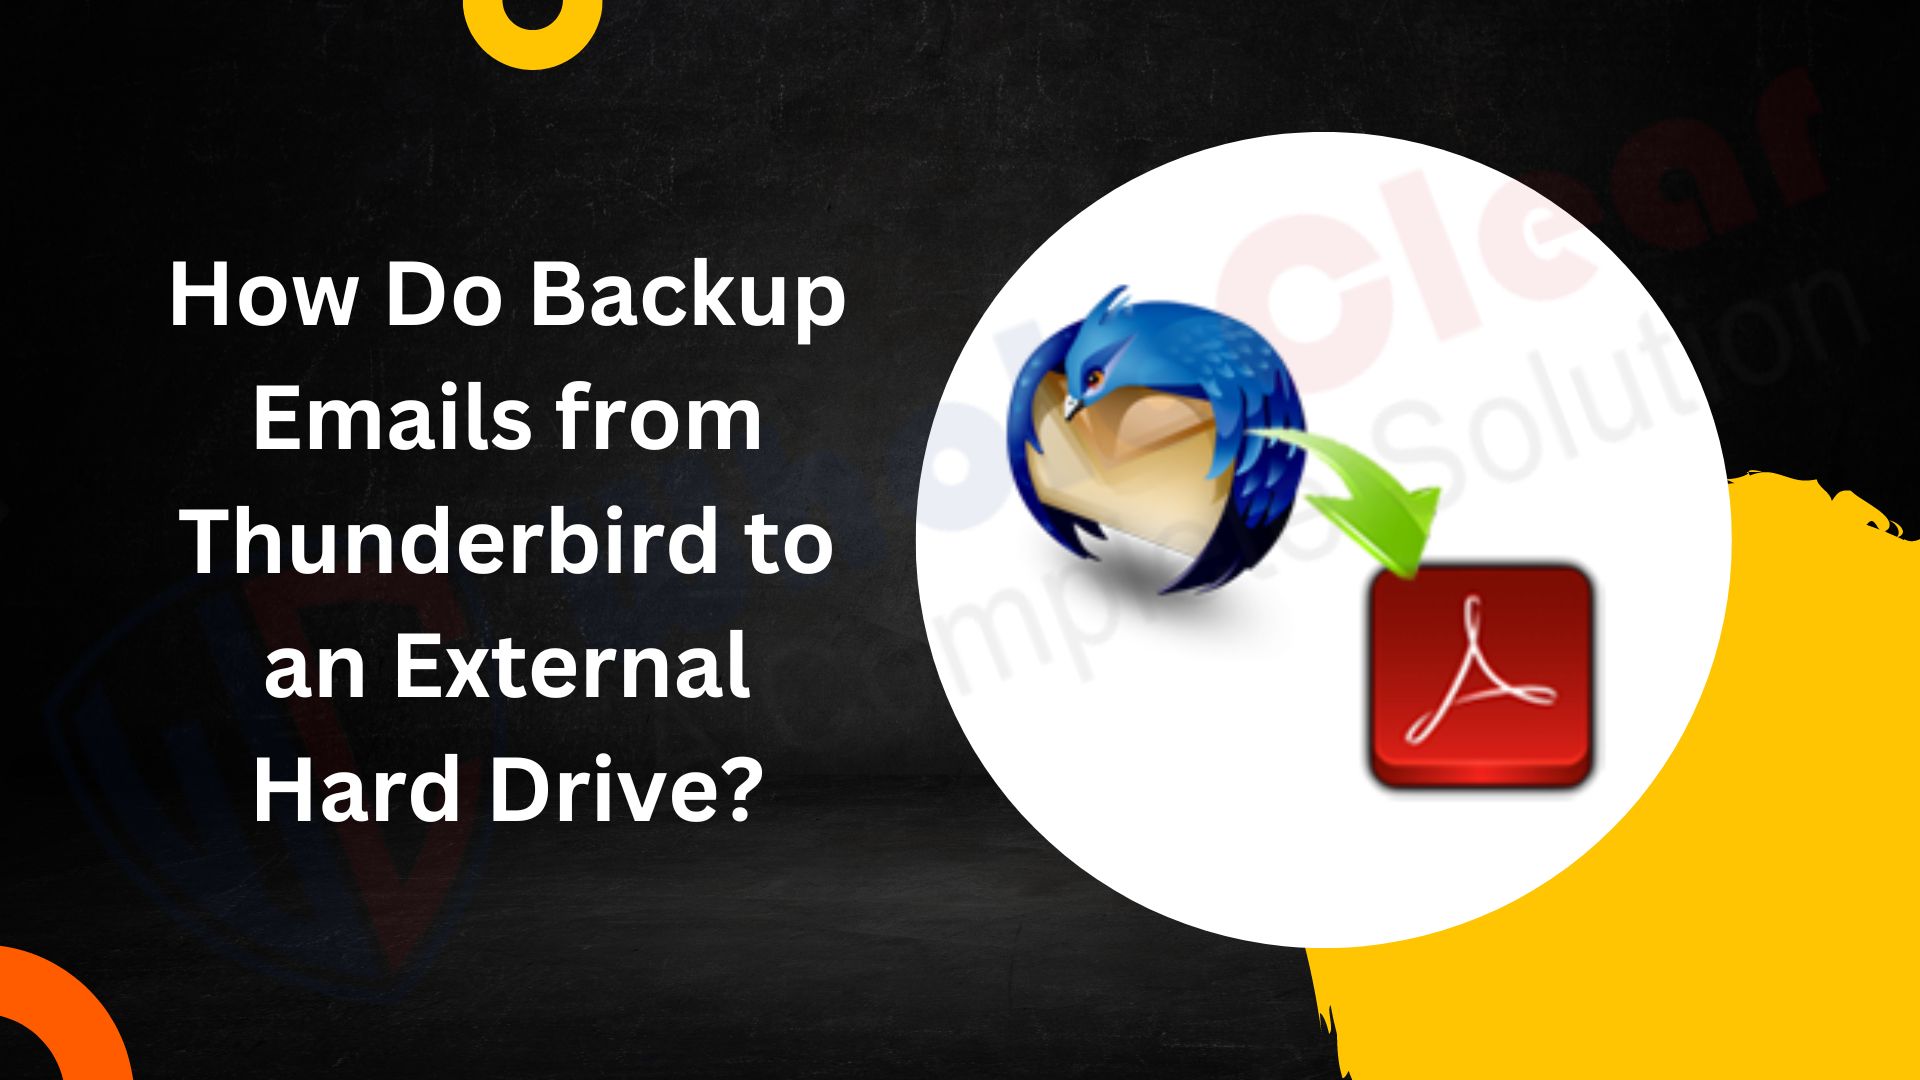 Backup Emails from Thunderbird to an External Hard Drive